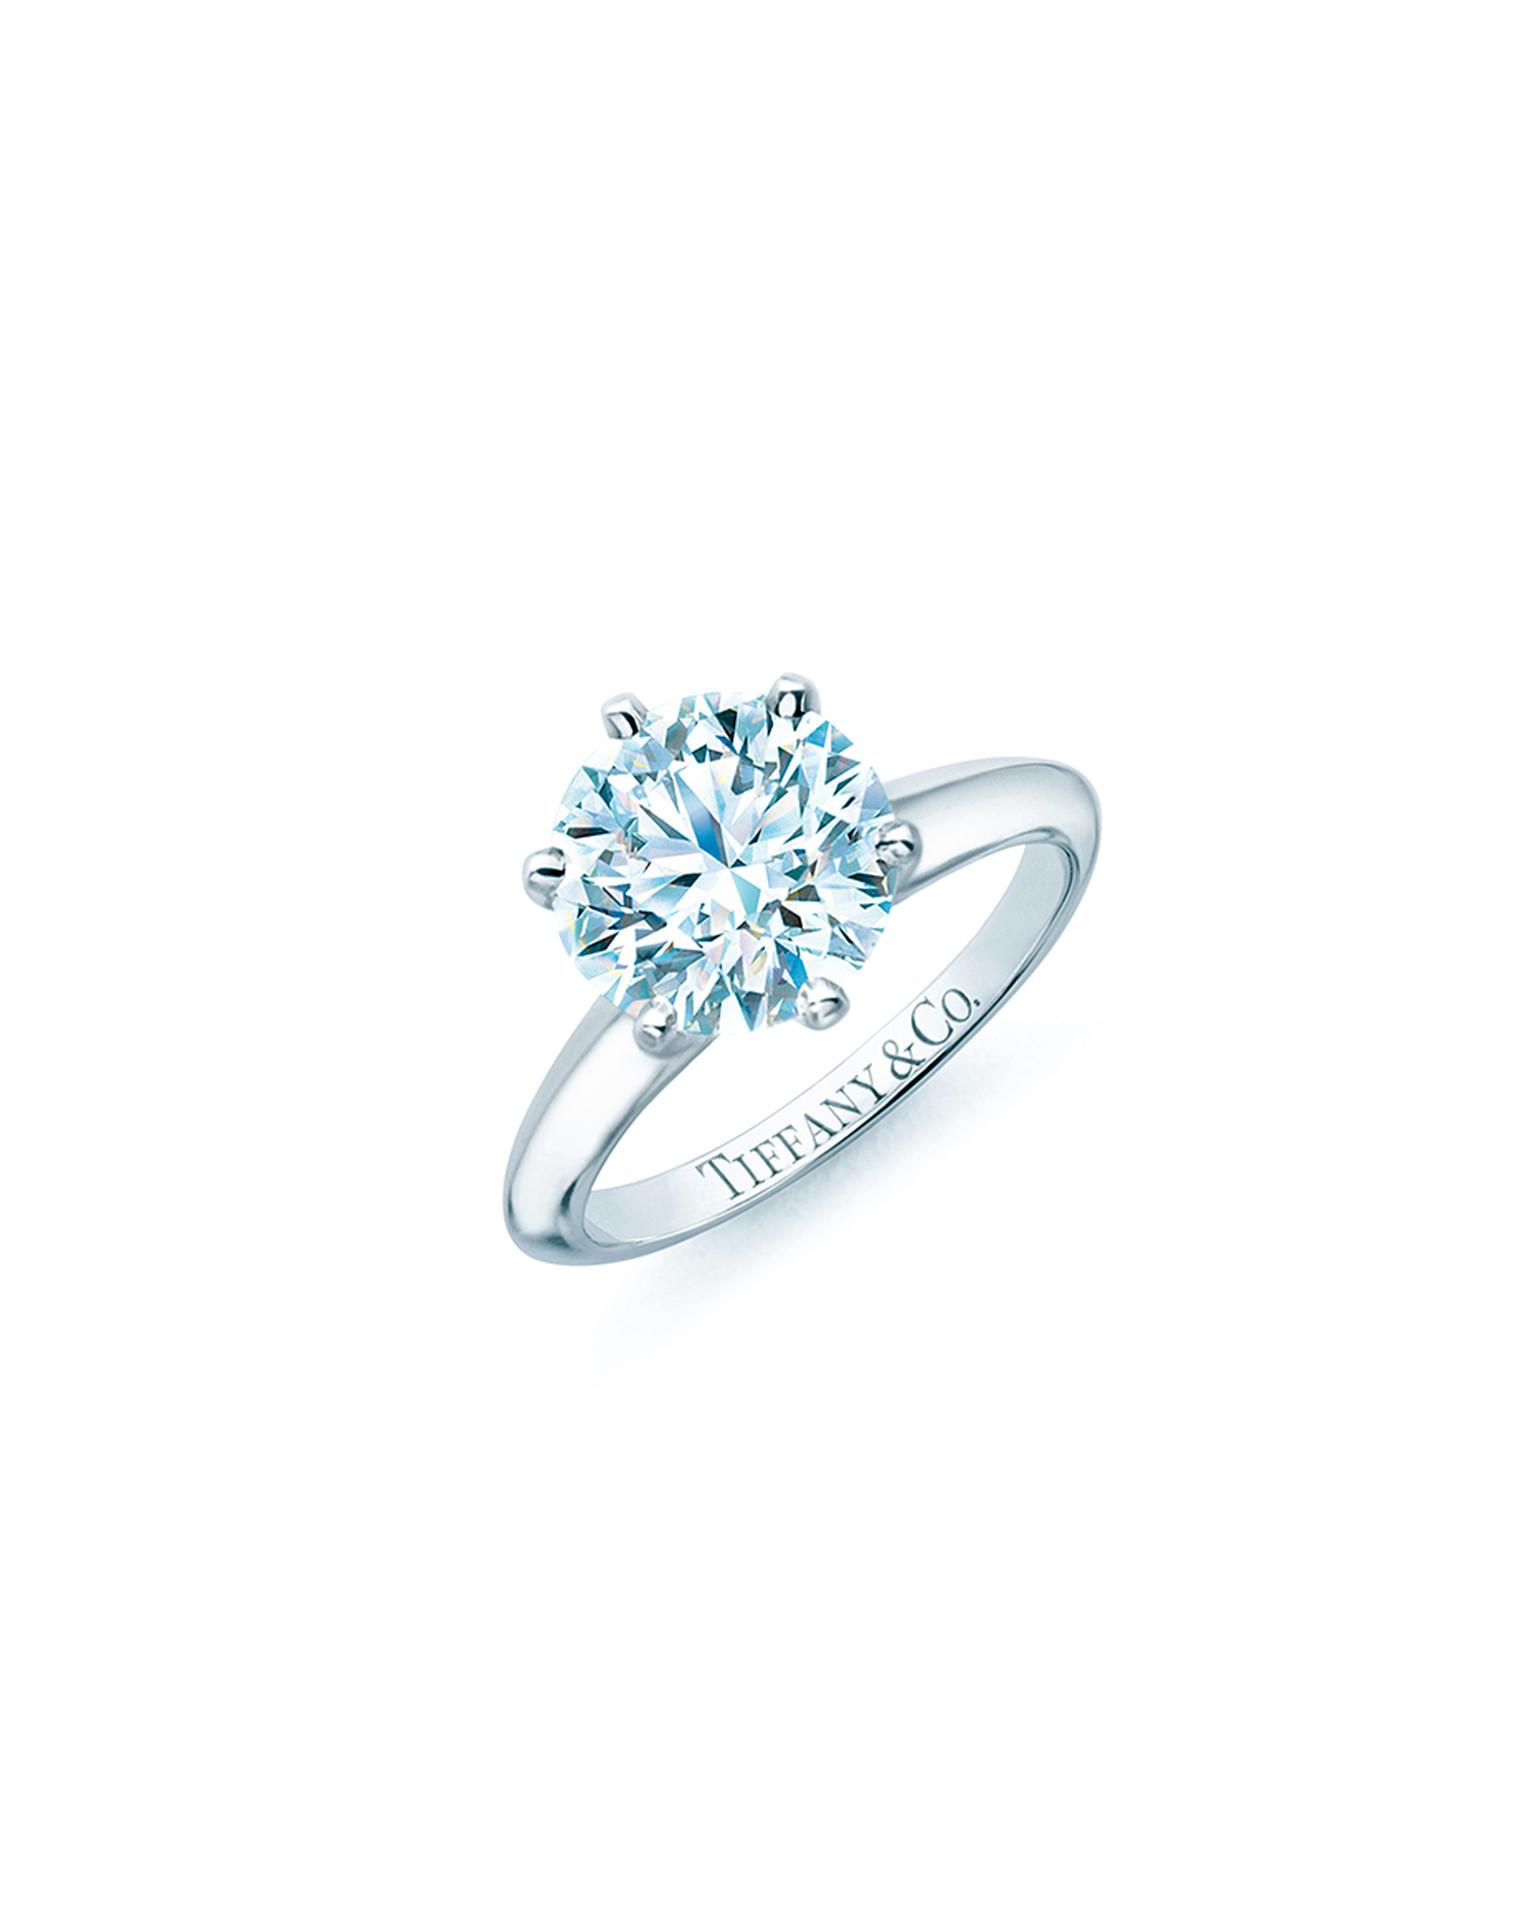 Created over a century ago, the classic Tiffany Setting engagement ring features a six-prong setting which lifts the round brilliant diamond up into the light, intensifying its fire and sparkle for all to see.